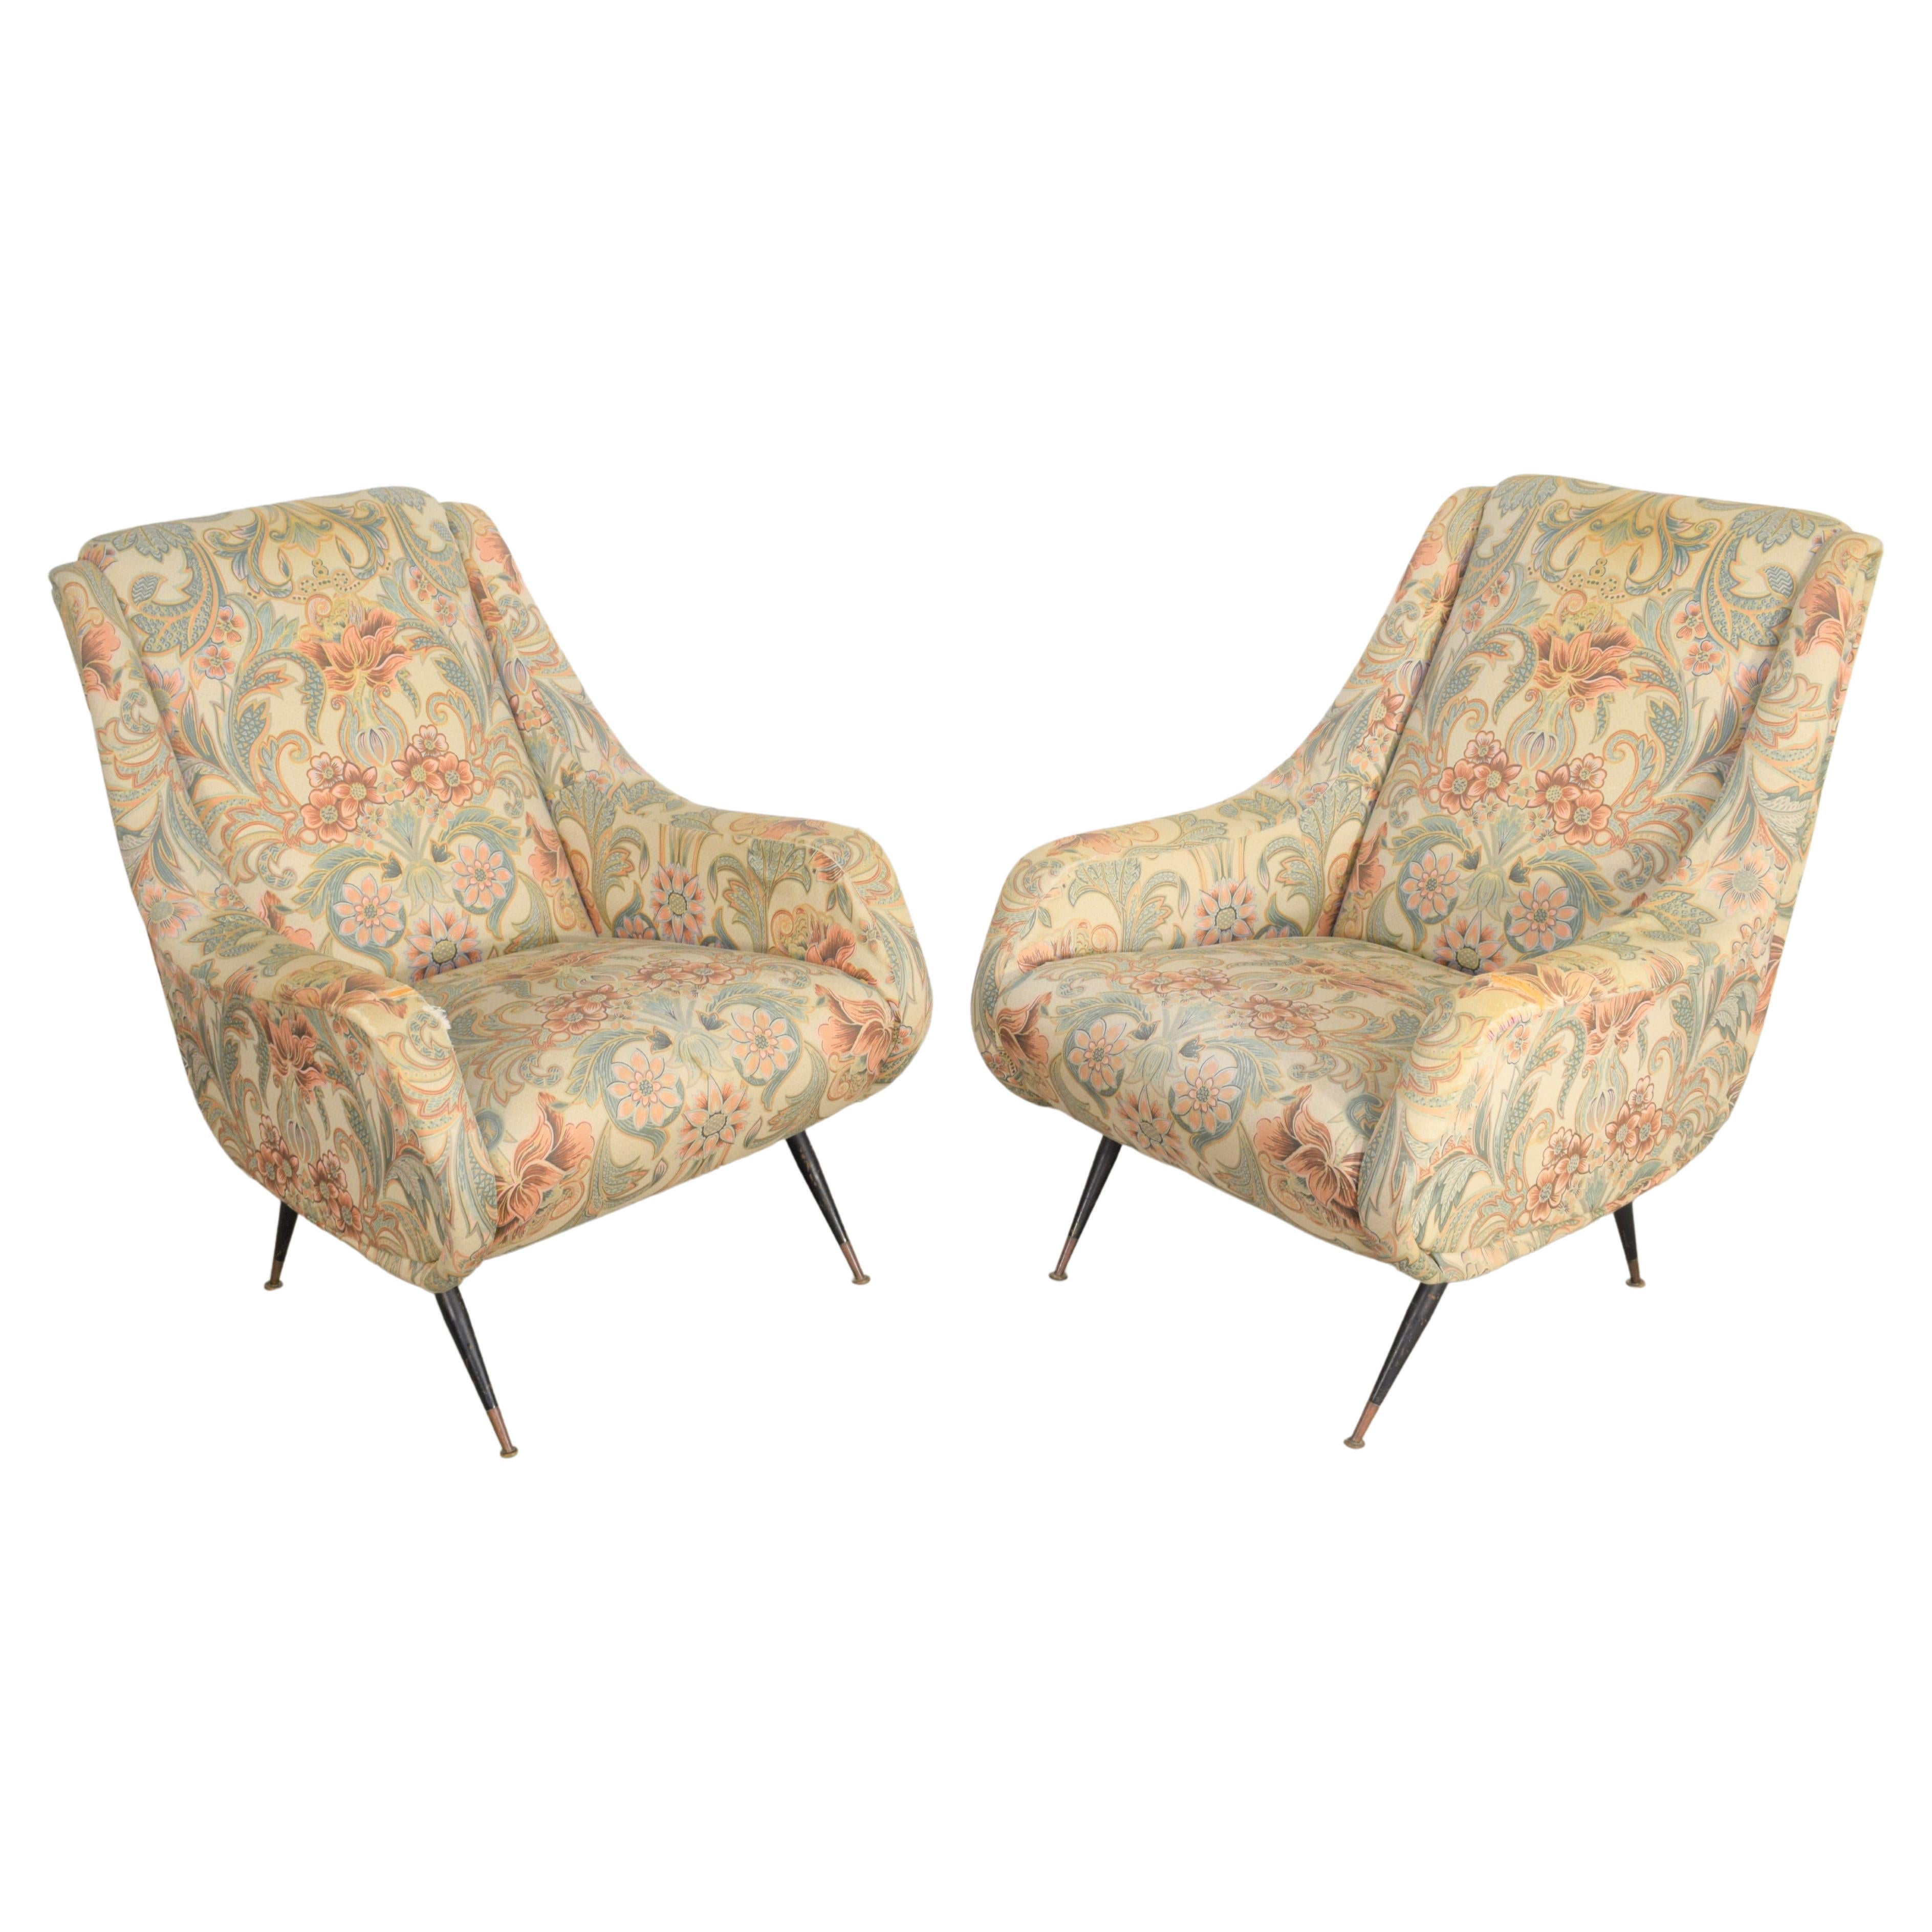 Pair of Italian Armchairs by Aldo Morbelli for Isa, 1950s